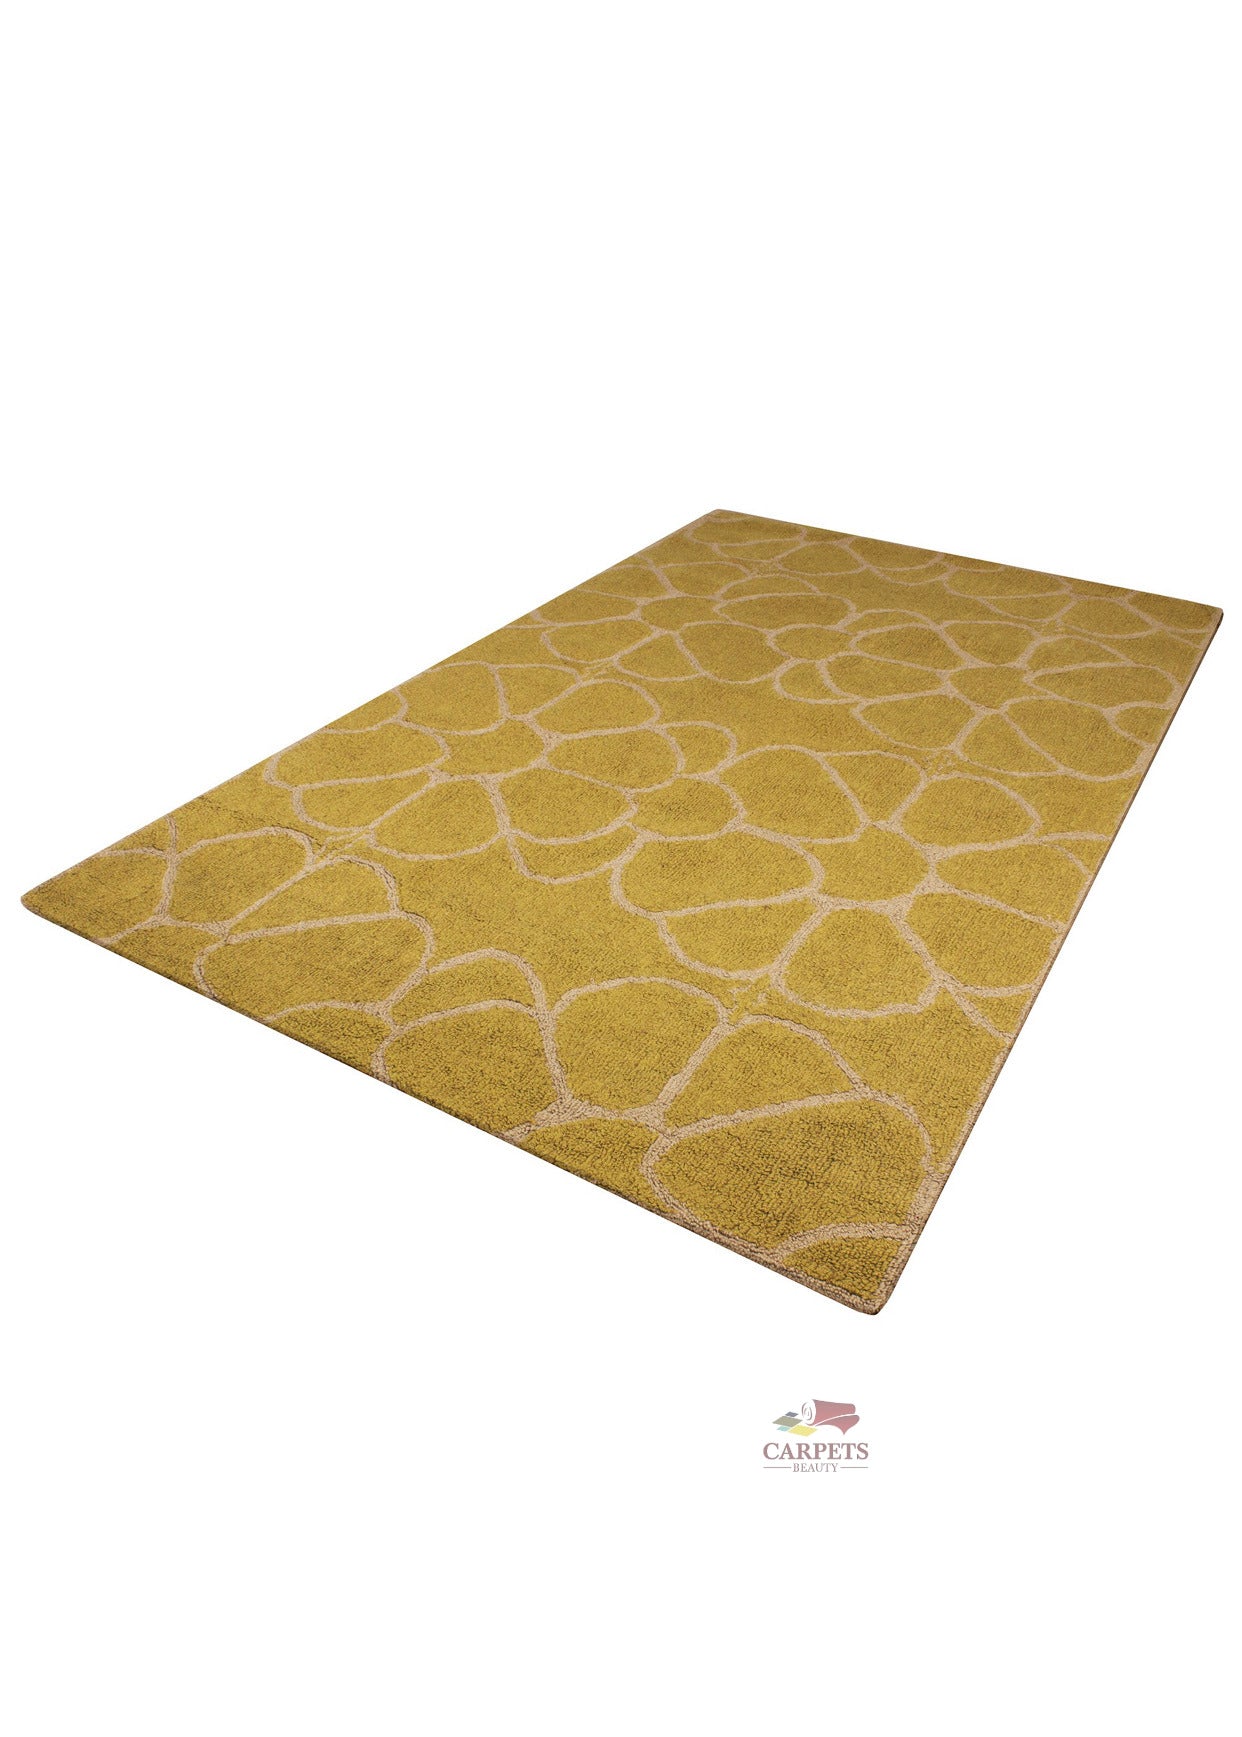 Medallion Yellow Color Floral Woolen Carpets for bedrooms and living rooms